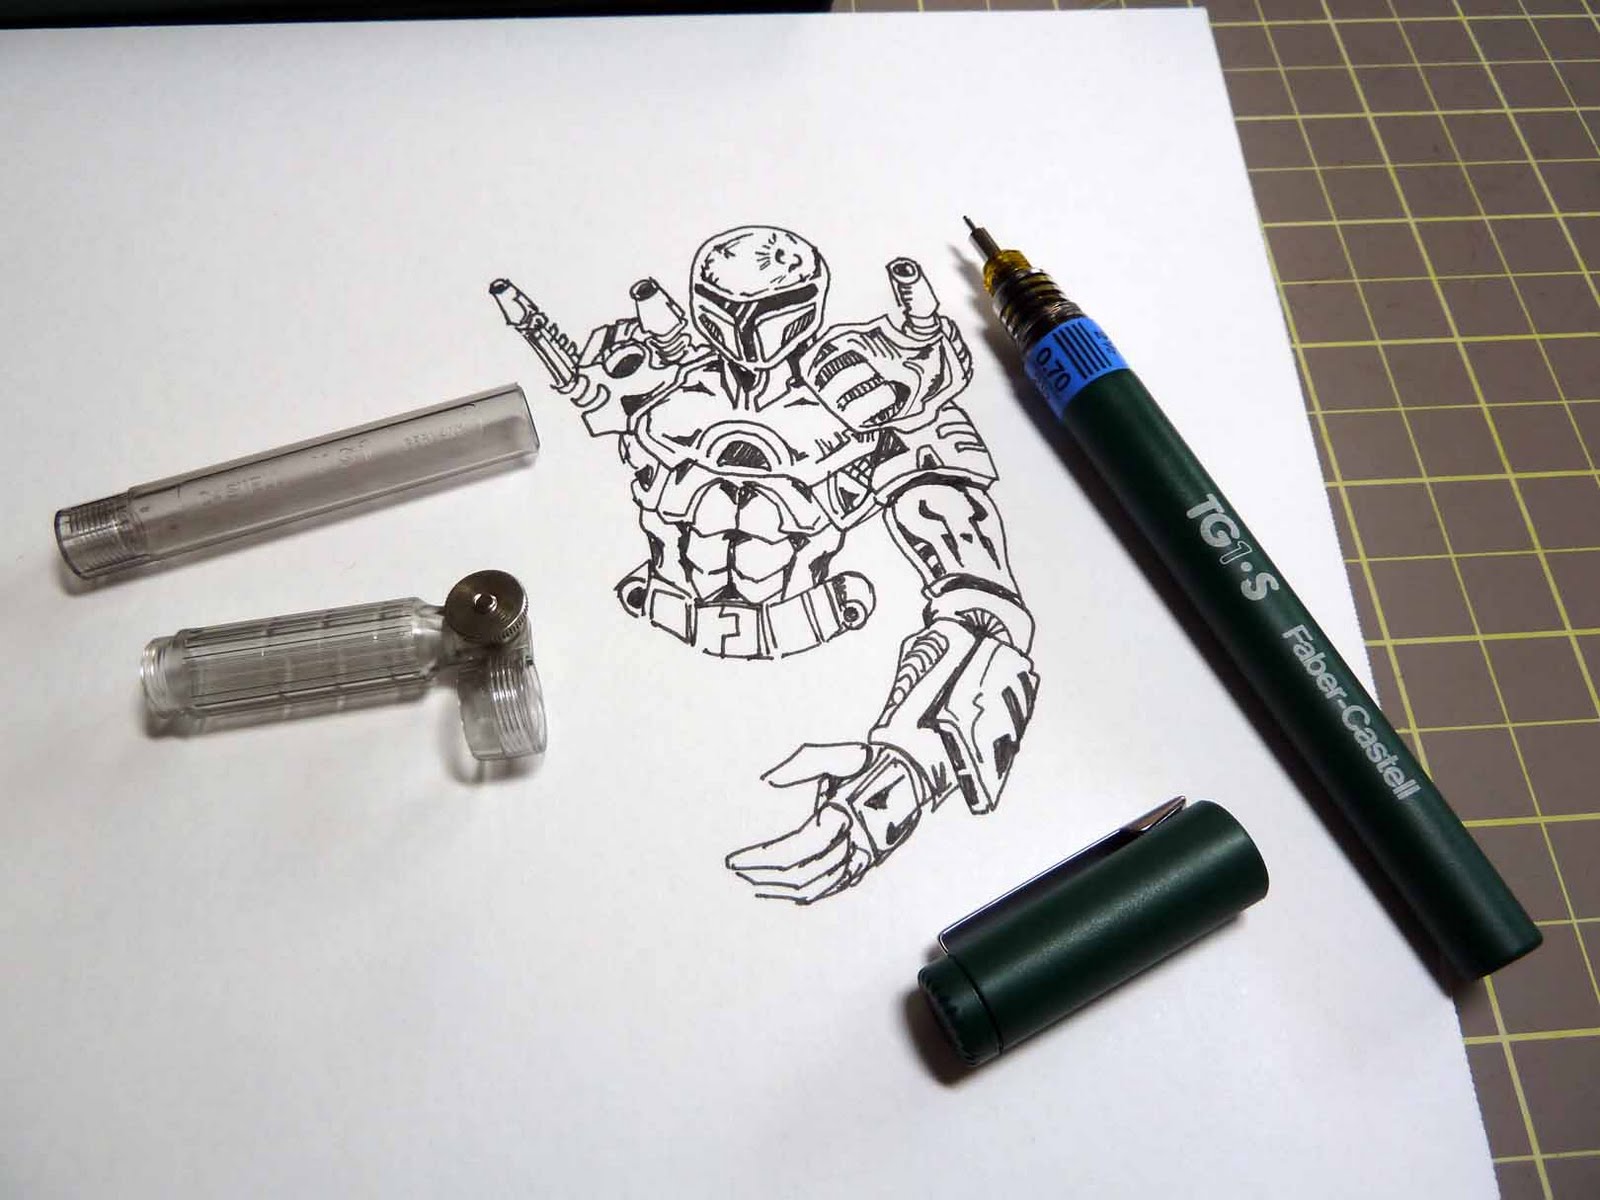 Art Supplies Reviews and Manga Cartoon Sketching: Doodling with the Faber  Castell TG1-S 0.7 mm Technical Pen